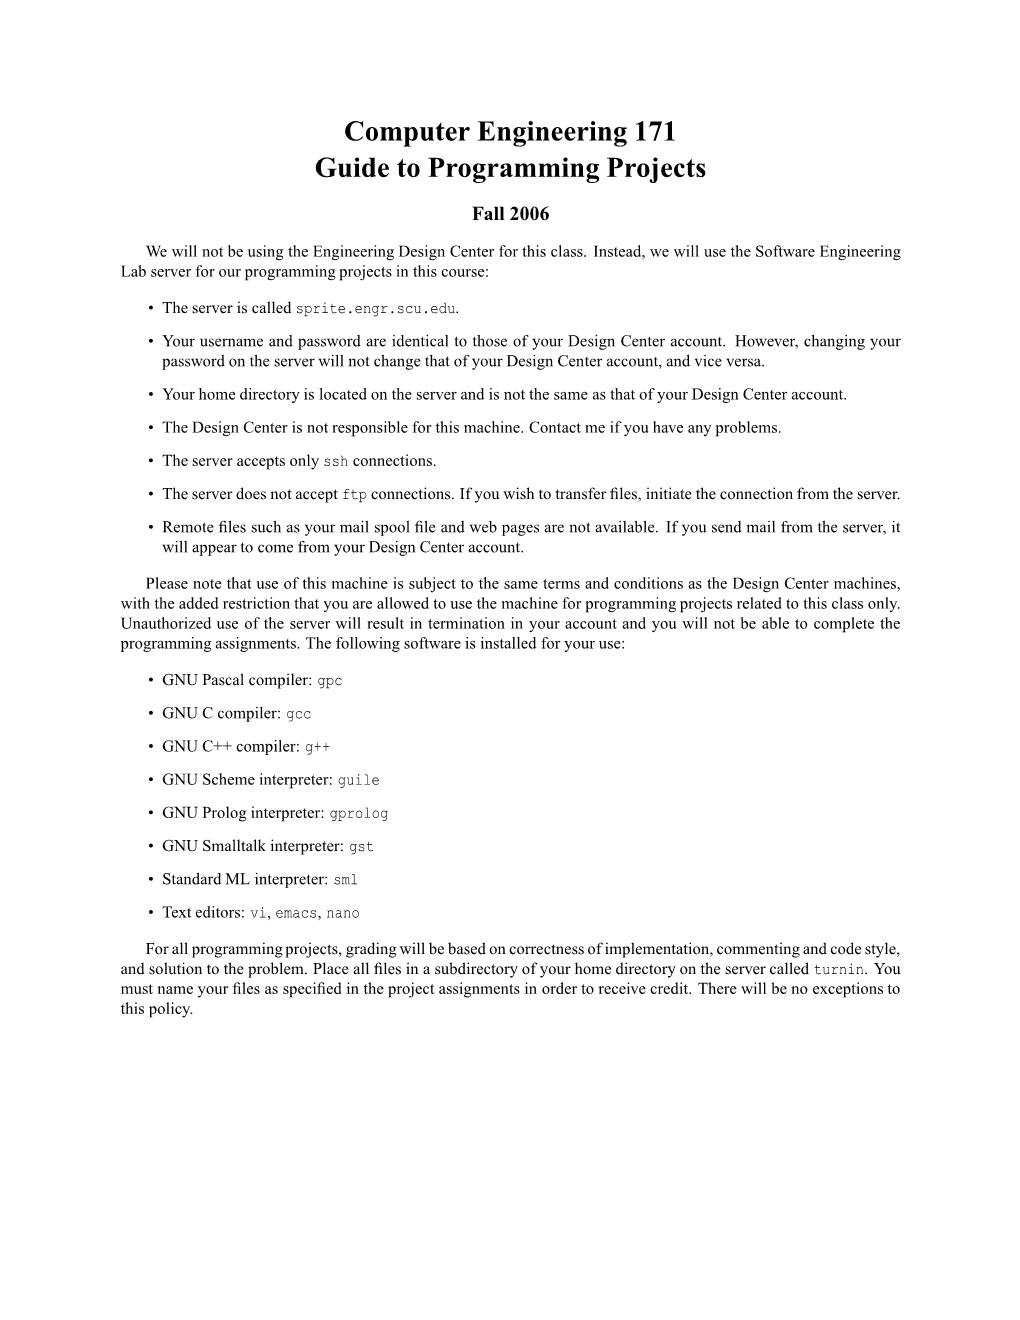 Computer Engineering 171 Guide to Programming Projects